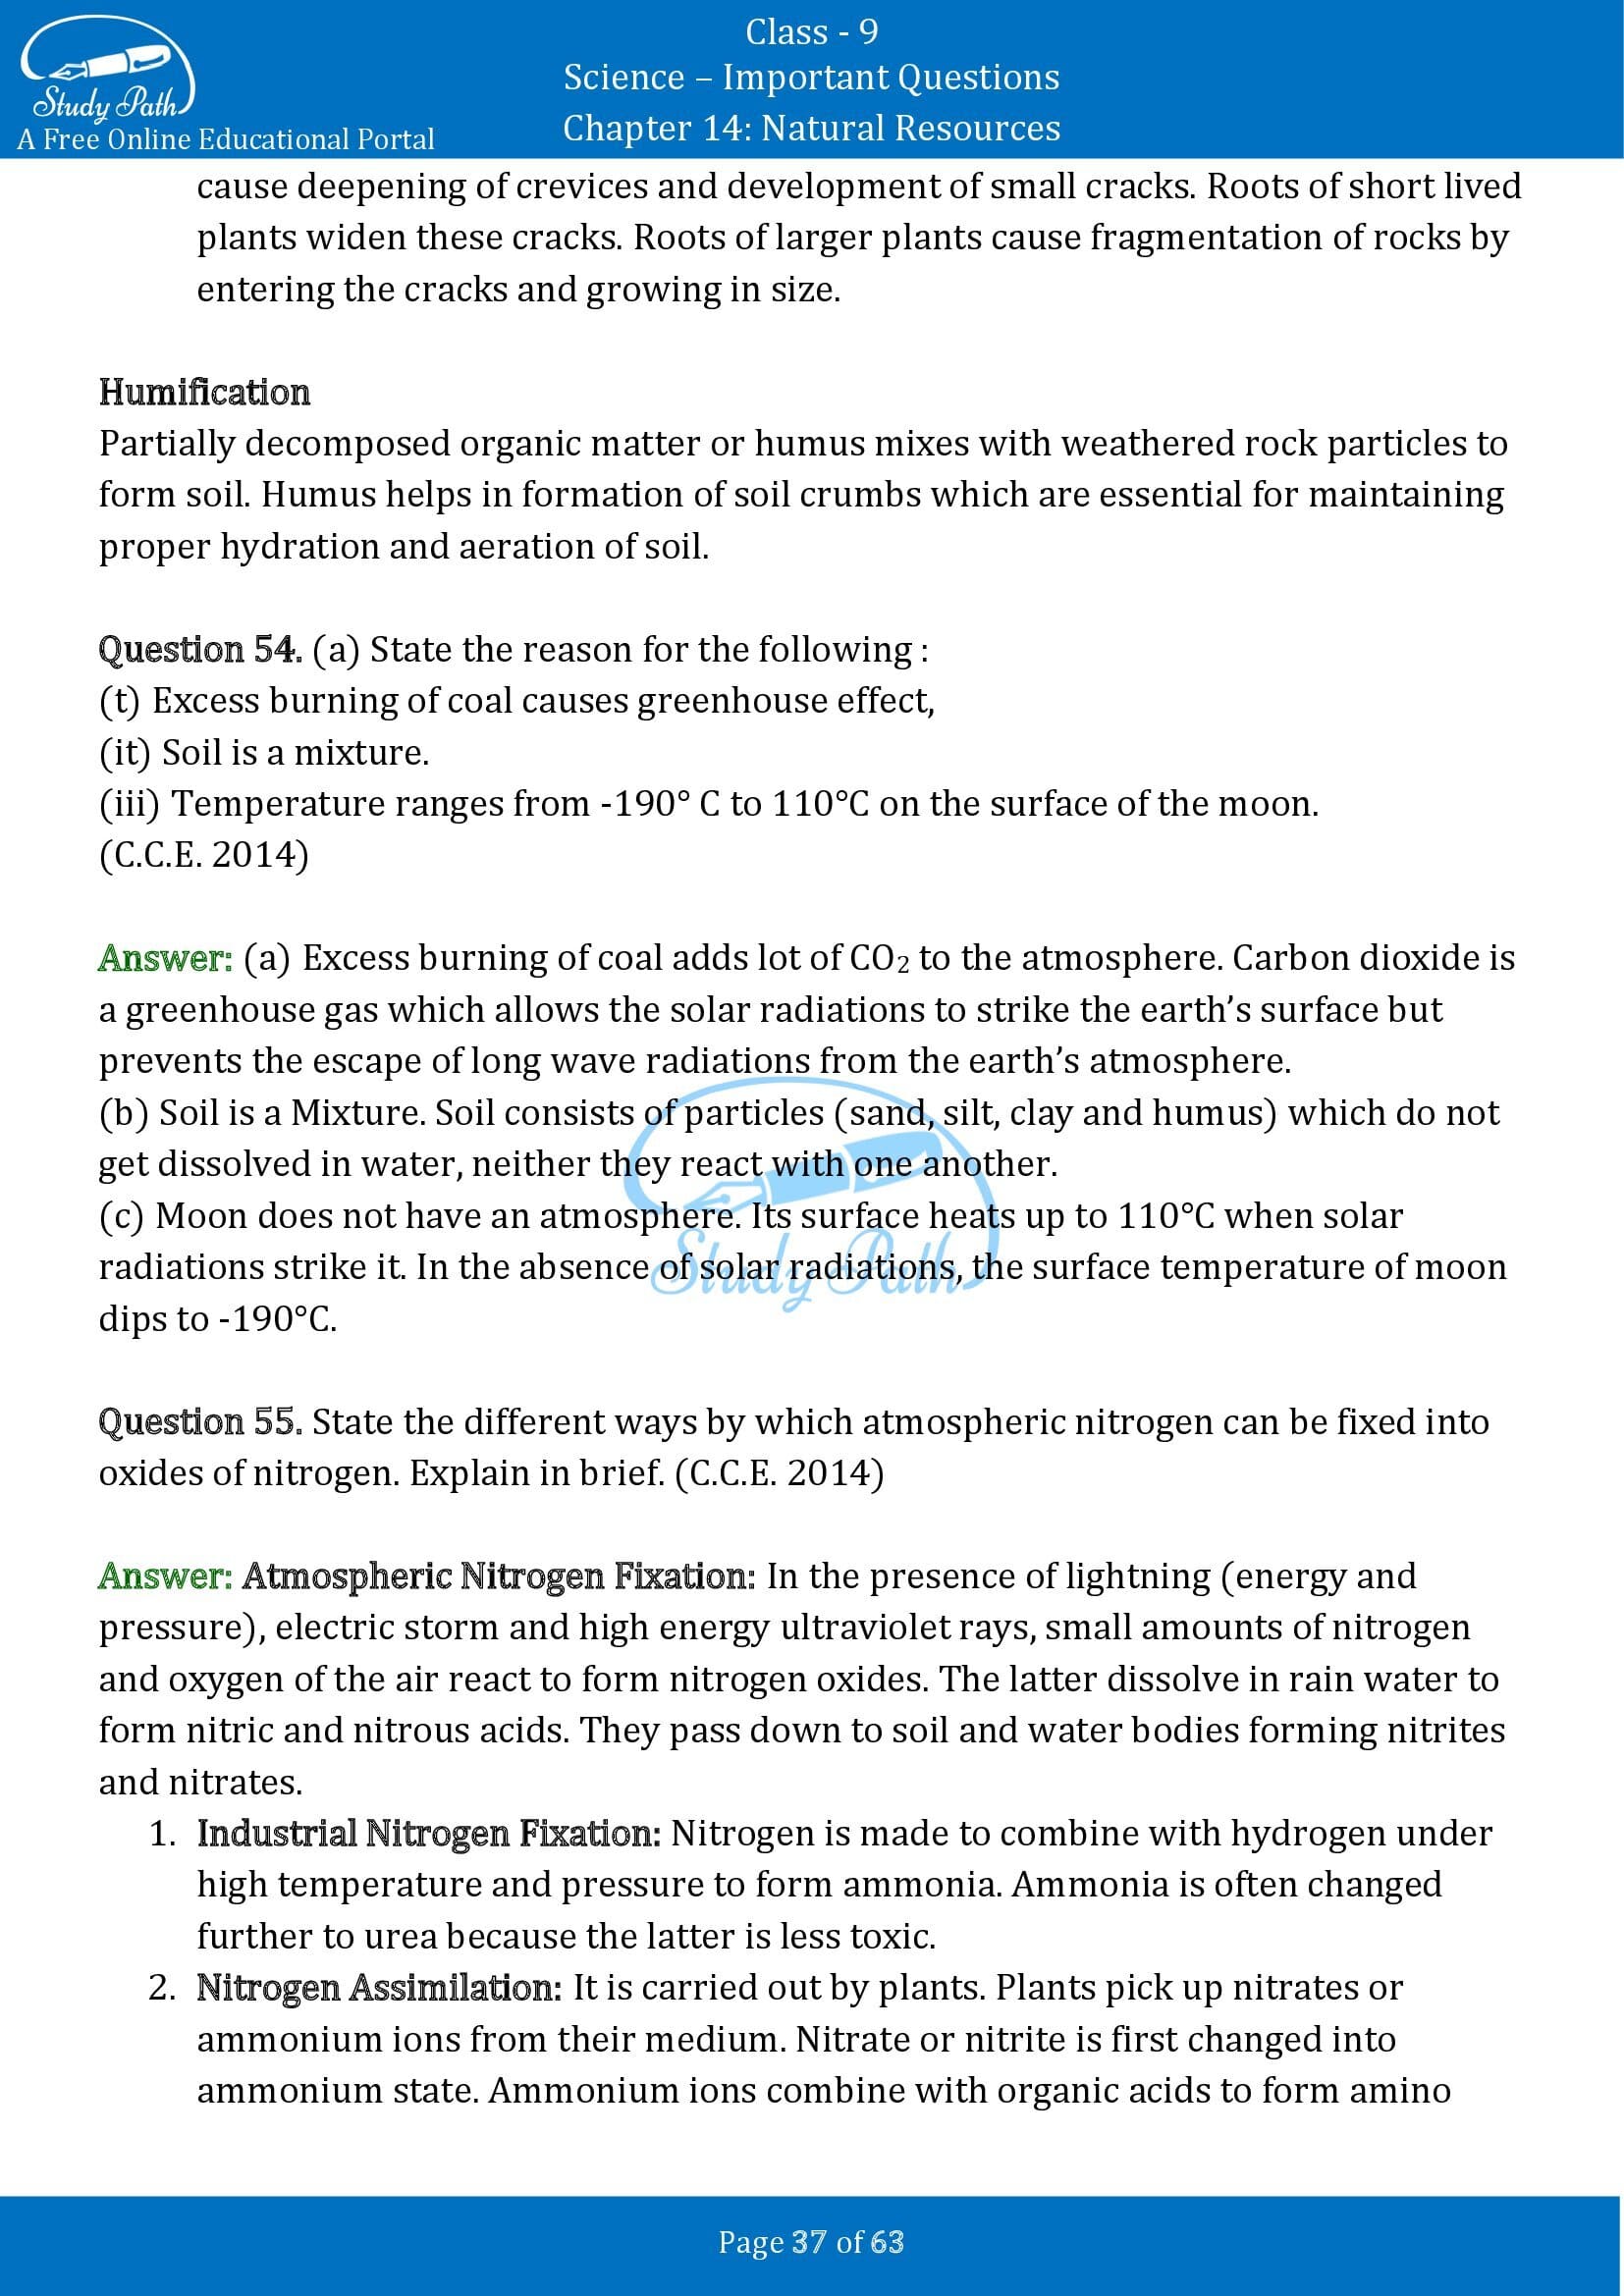 Important Questions for Class 9 Science Chapter 14 Natural Resources 00037